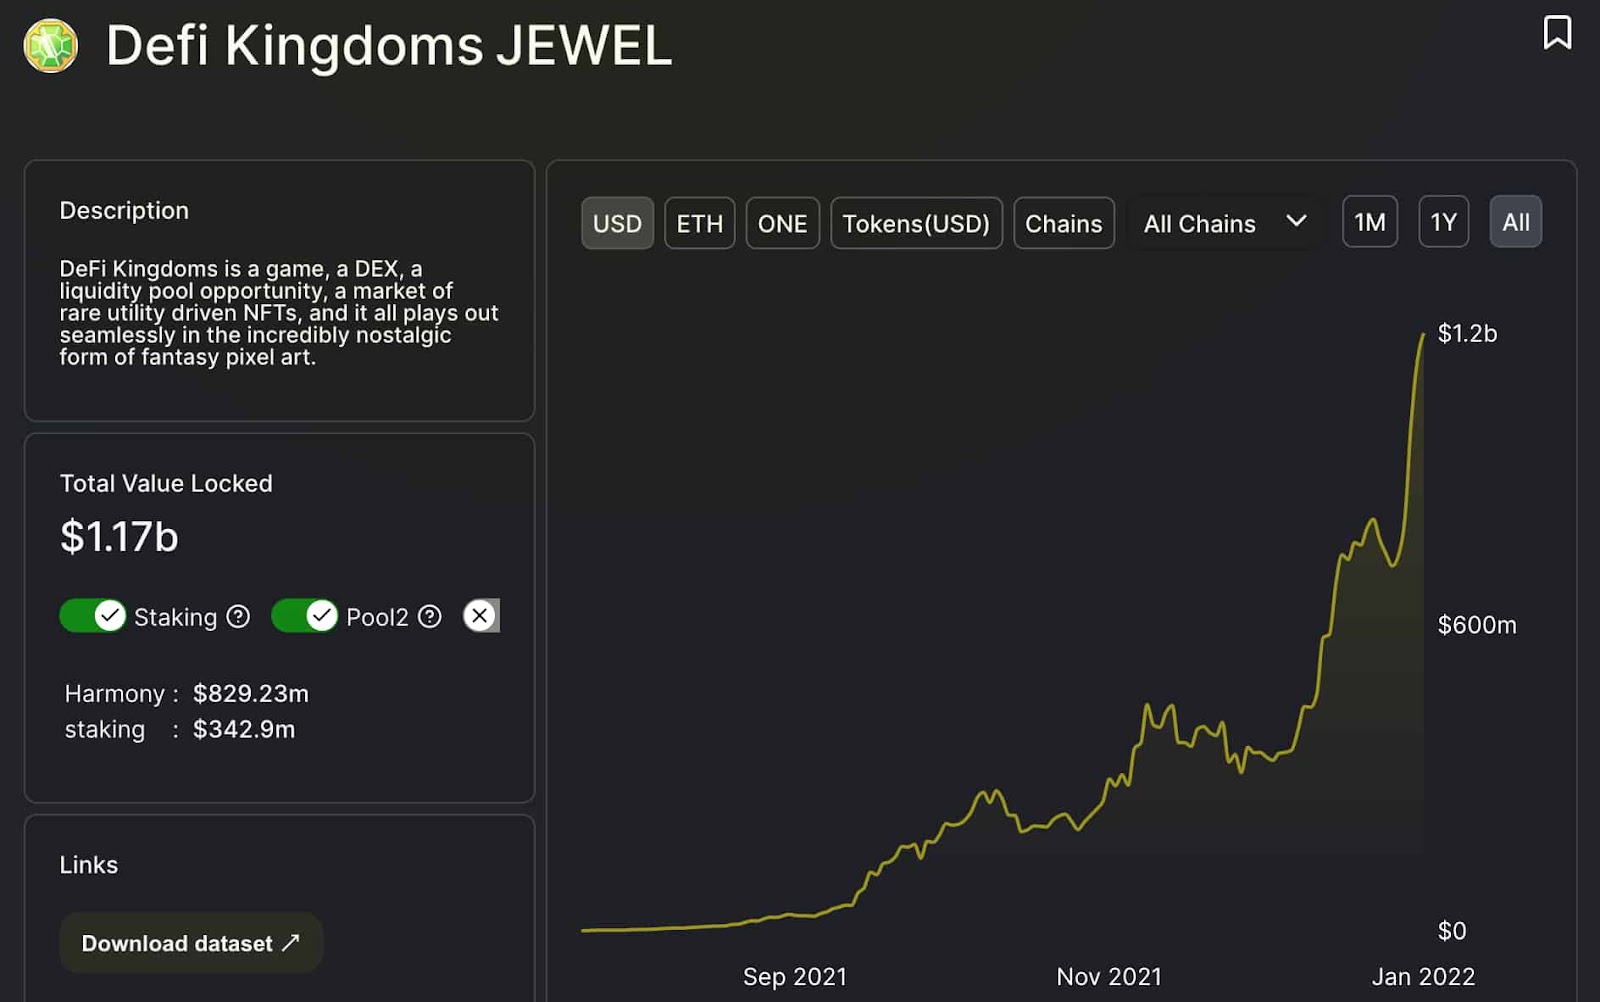 Screen playback with JEWEL and DeFi Kingdoms TVL values ​​and graph